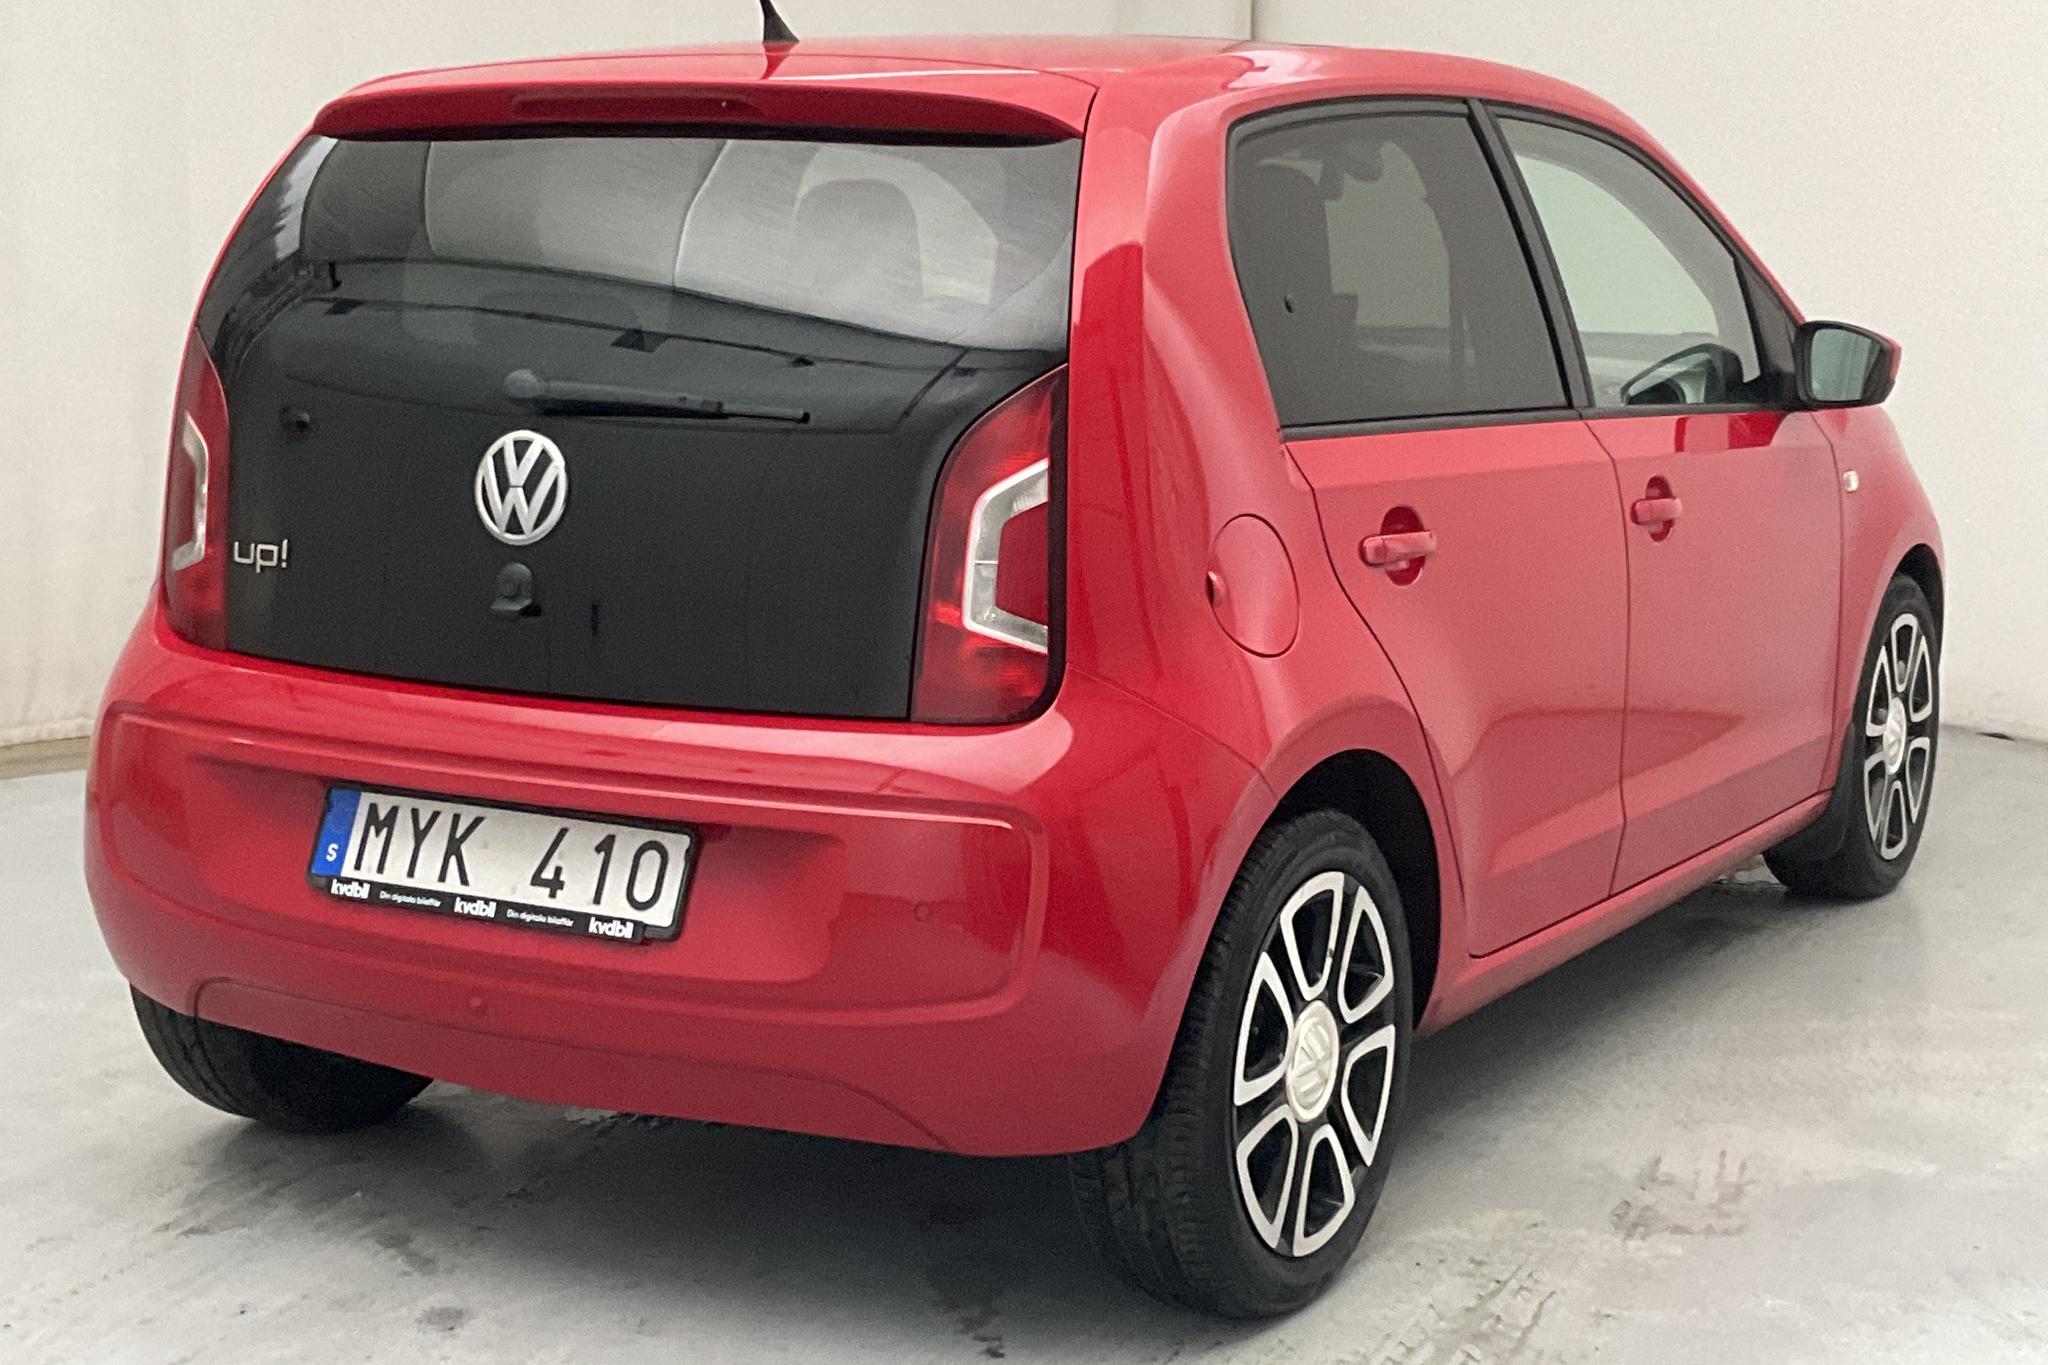 VW up! 1.0 5dr (75hk) - 54 390 km - Manual - red - 2013